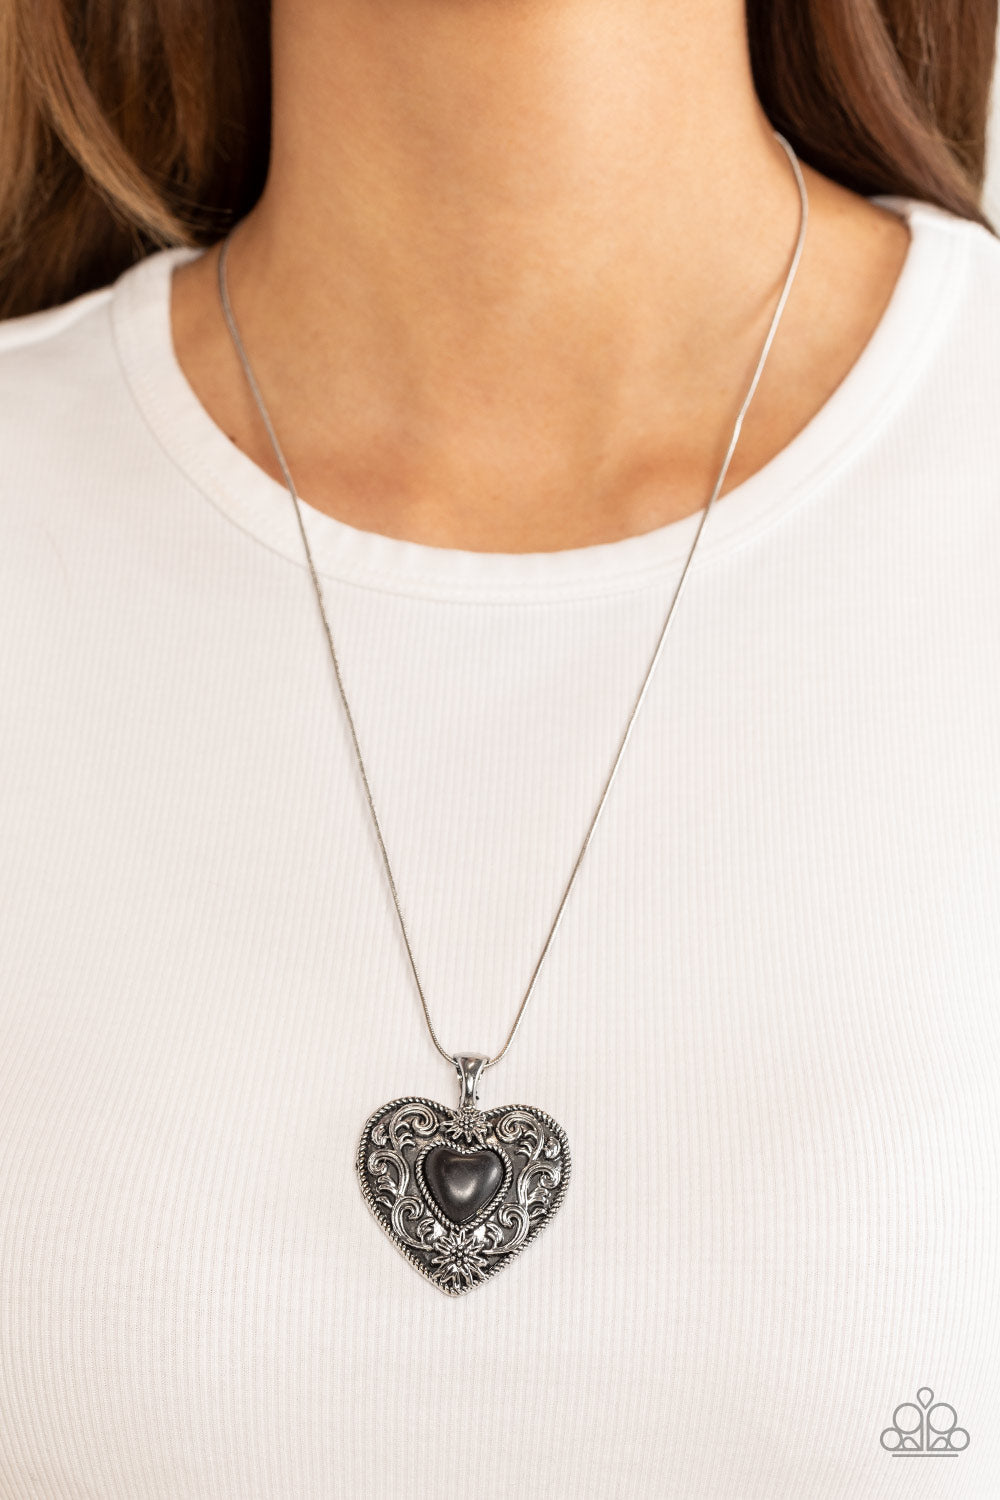 Wholeheartedly Whimsical - Black and Silver Necklace - Paparazzi Jewelry - Bejeweled Accessories By Kristie - Embossed in whimsical flowers and vines, a rustic silver heart frame is adorned with a black stone heart center for an adoring artisan finish as it glides along a rounded silver snake chain across the chest. Features an adjustable clasp closure.